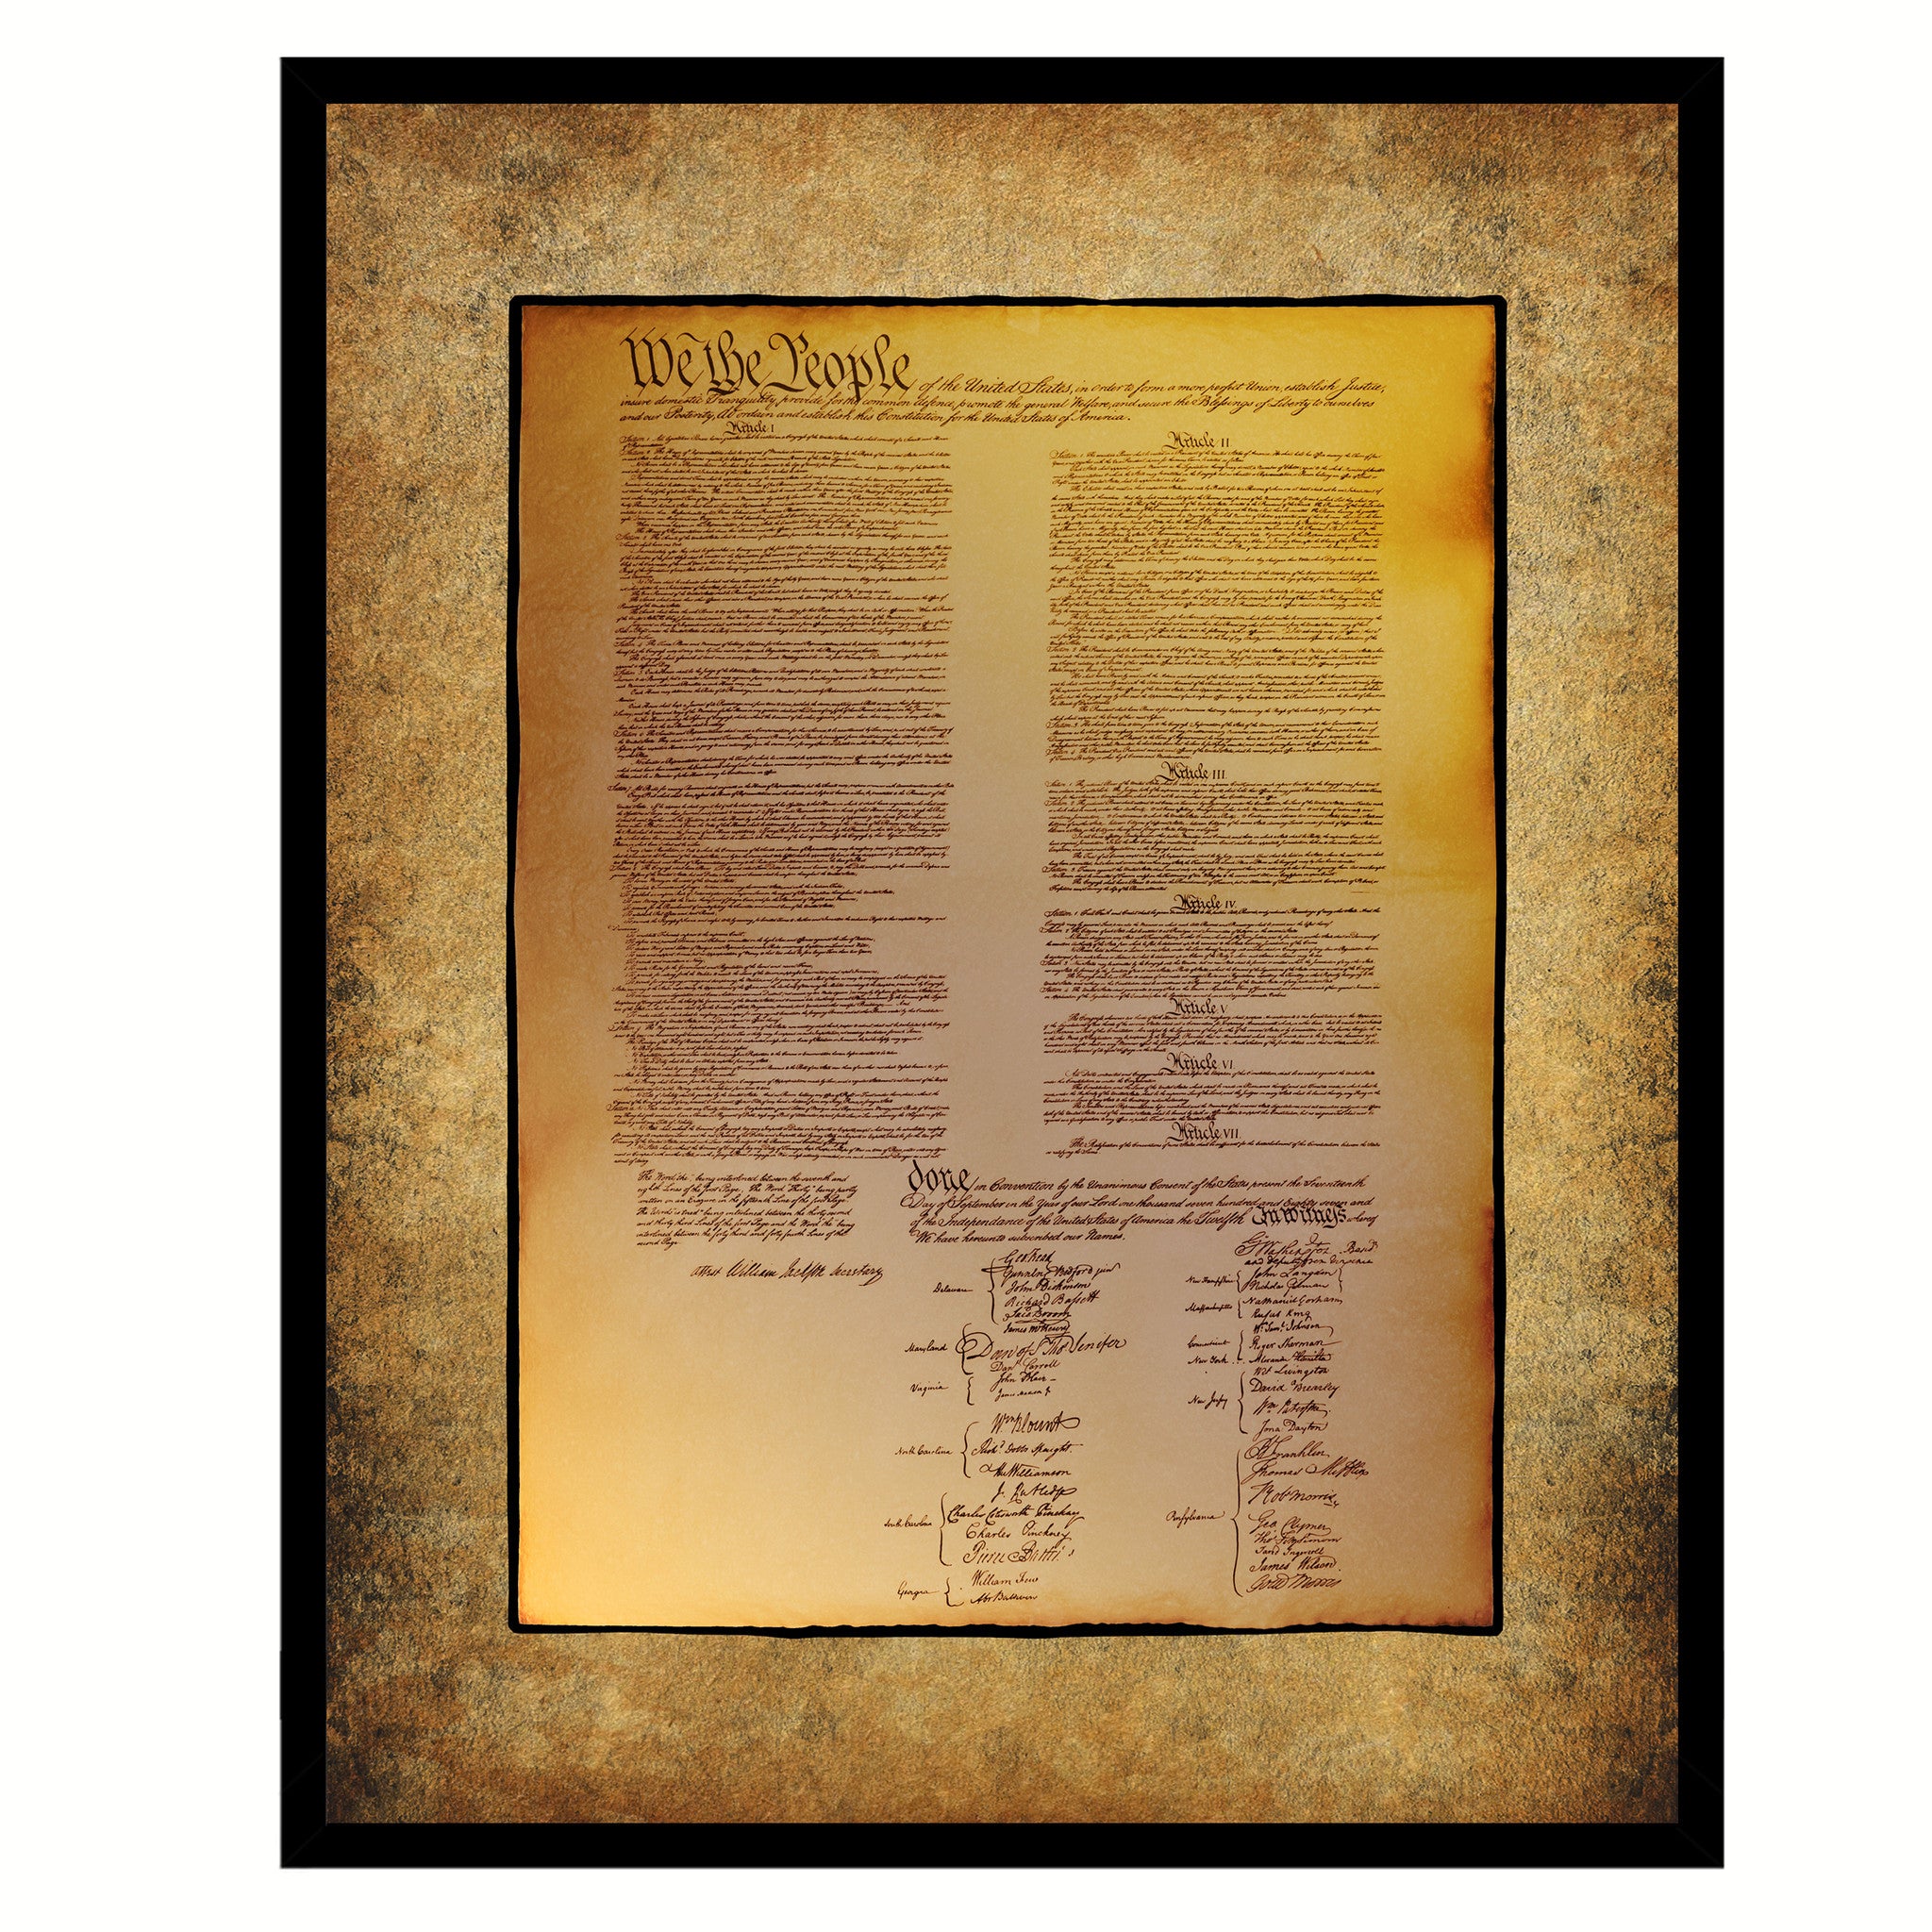 US Constitution We The People Framed Canvas Print Home Décor Wall Art